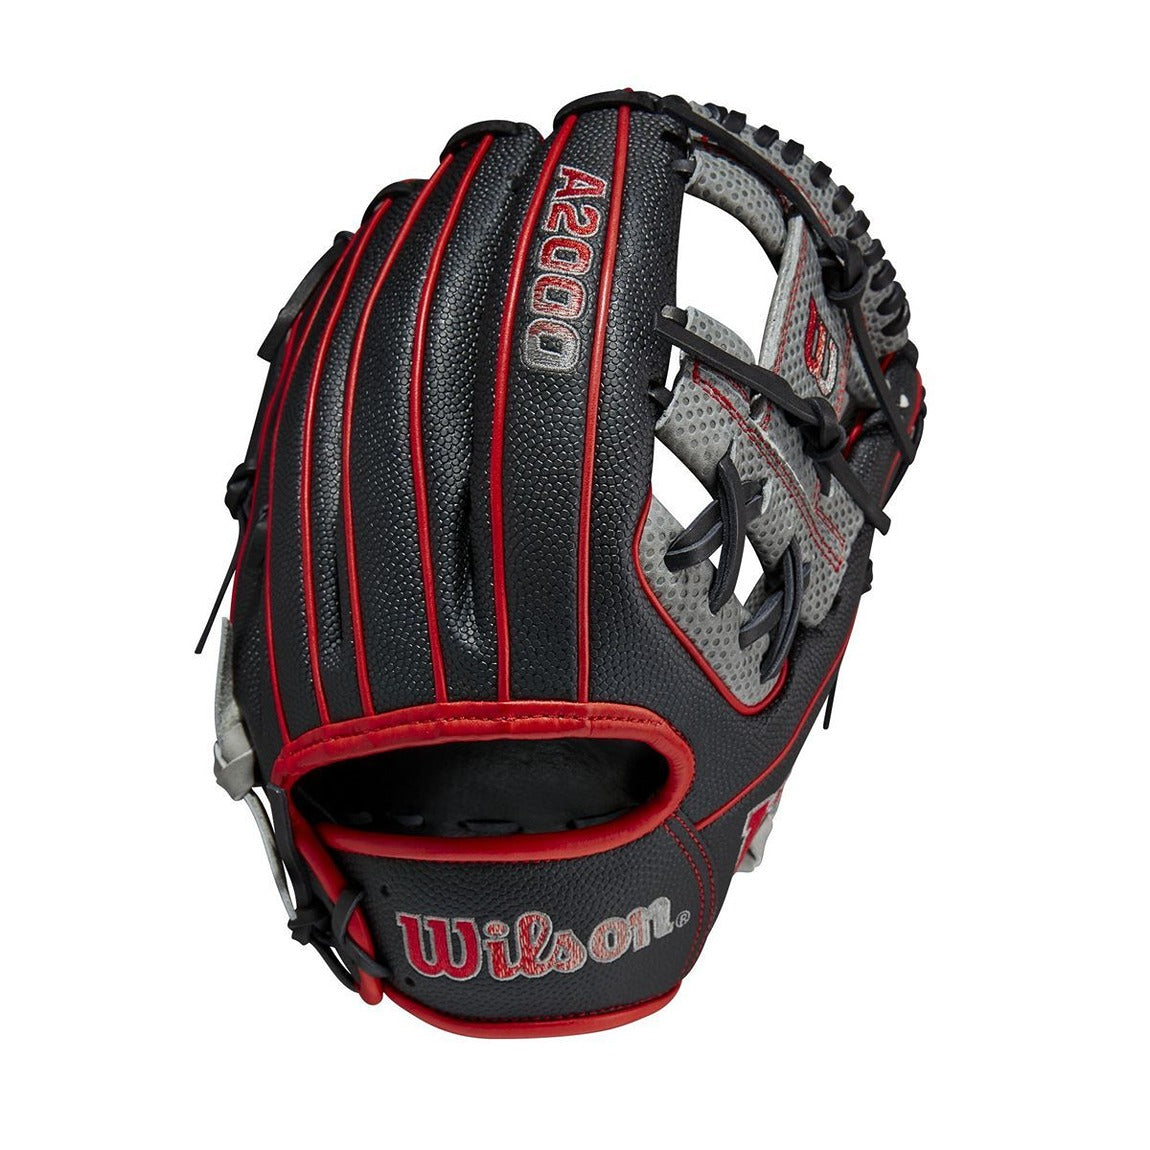 Wilson A2000 SuperSkin with Spin Control Technology SC75 11.75" Glove